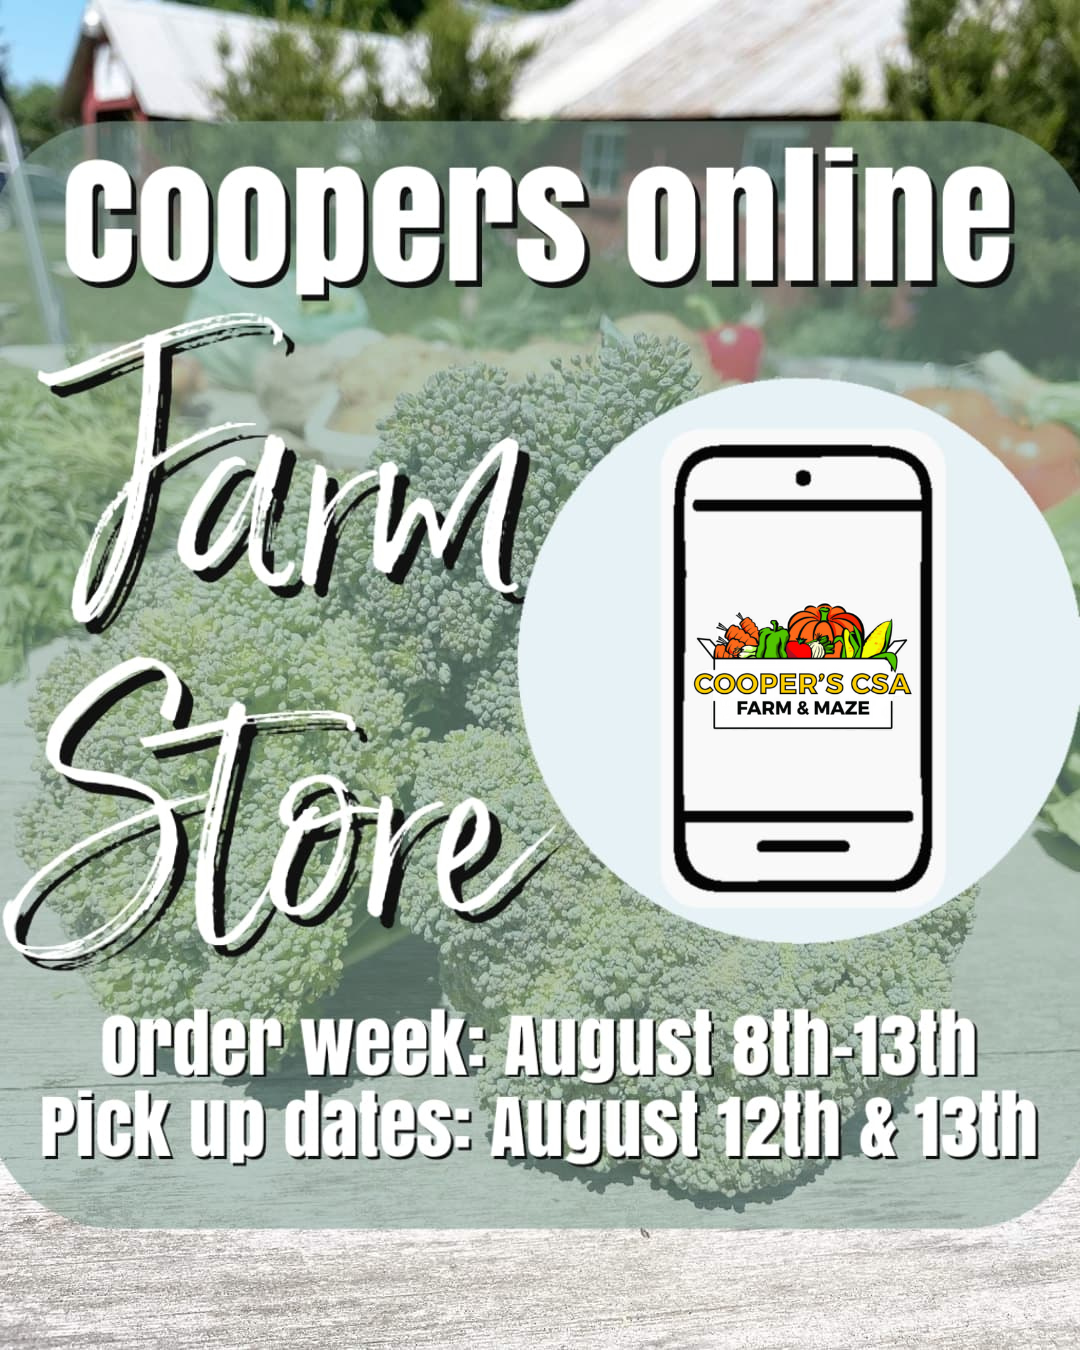 Previous Happening: Coopers Online Farm Stand- August th-13th